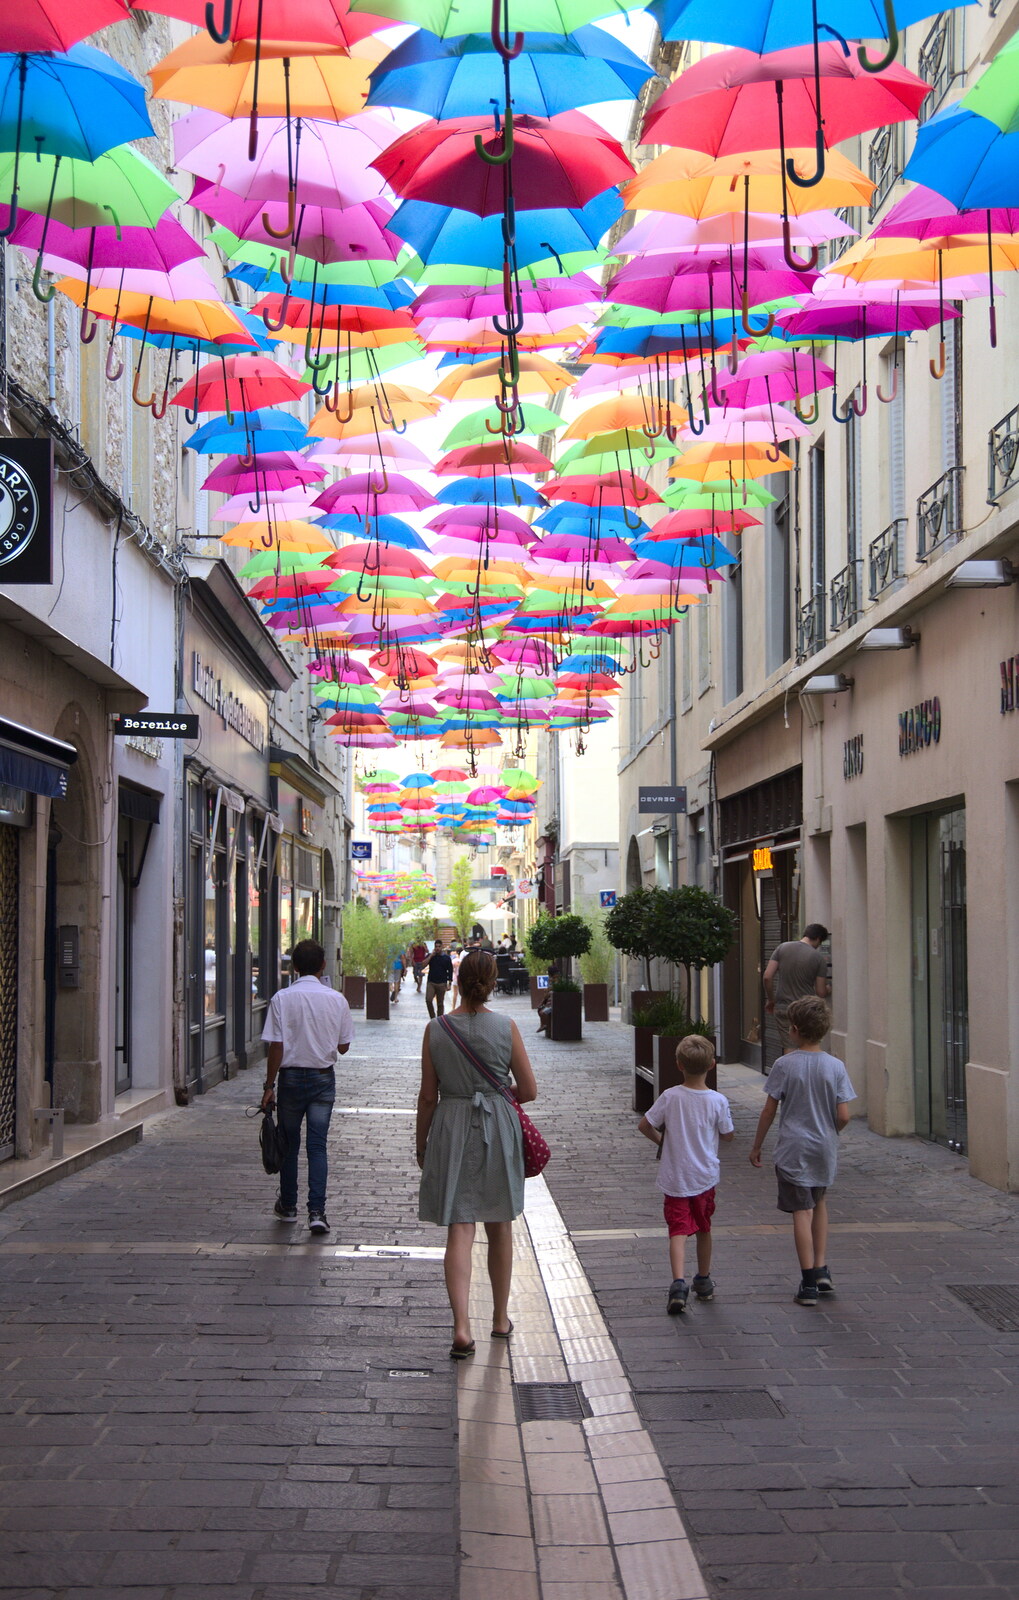 Isobel, Harry and Fred wander under the parapluies from A Trip to Carcassonne, Aude, France - 8th August 2018